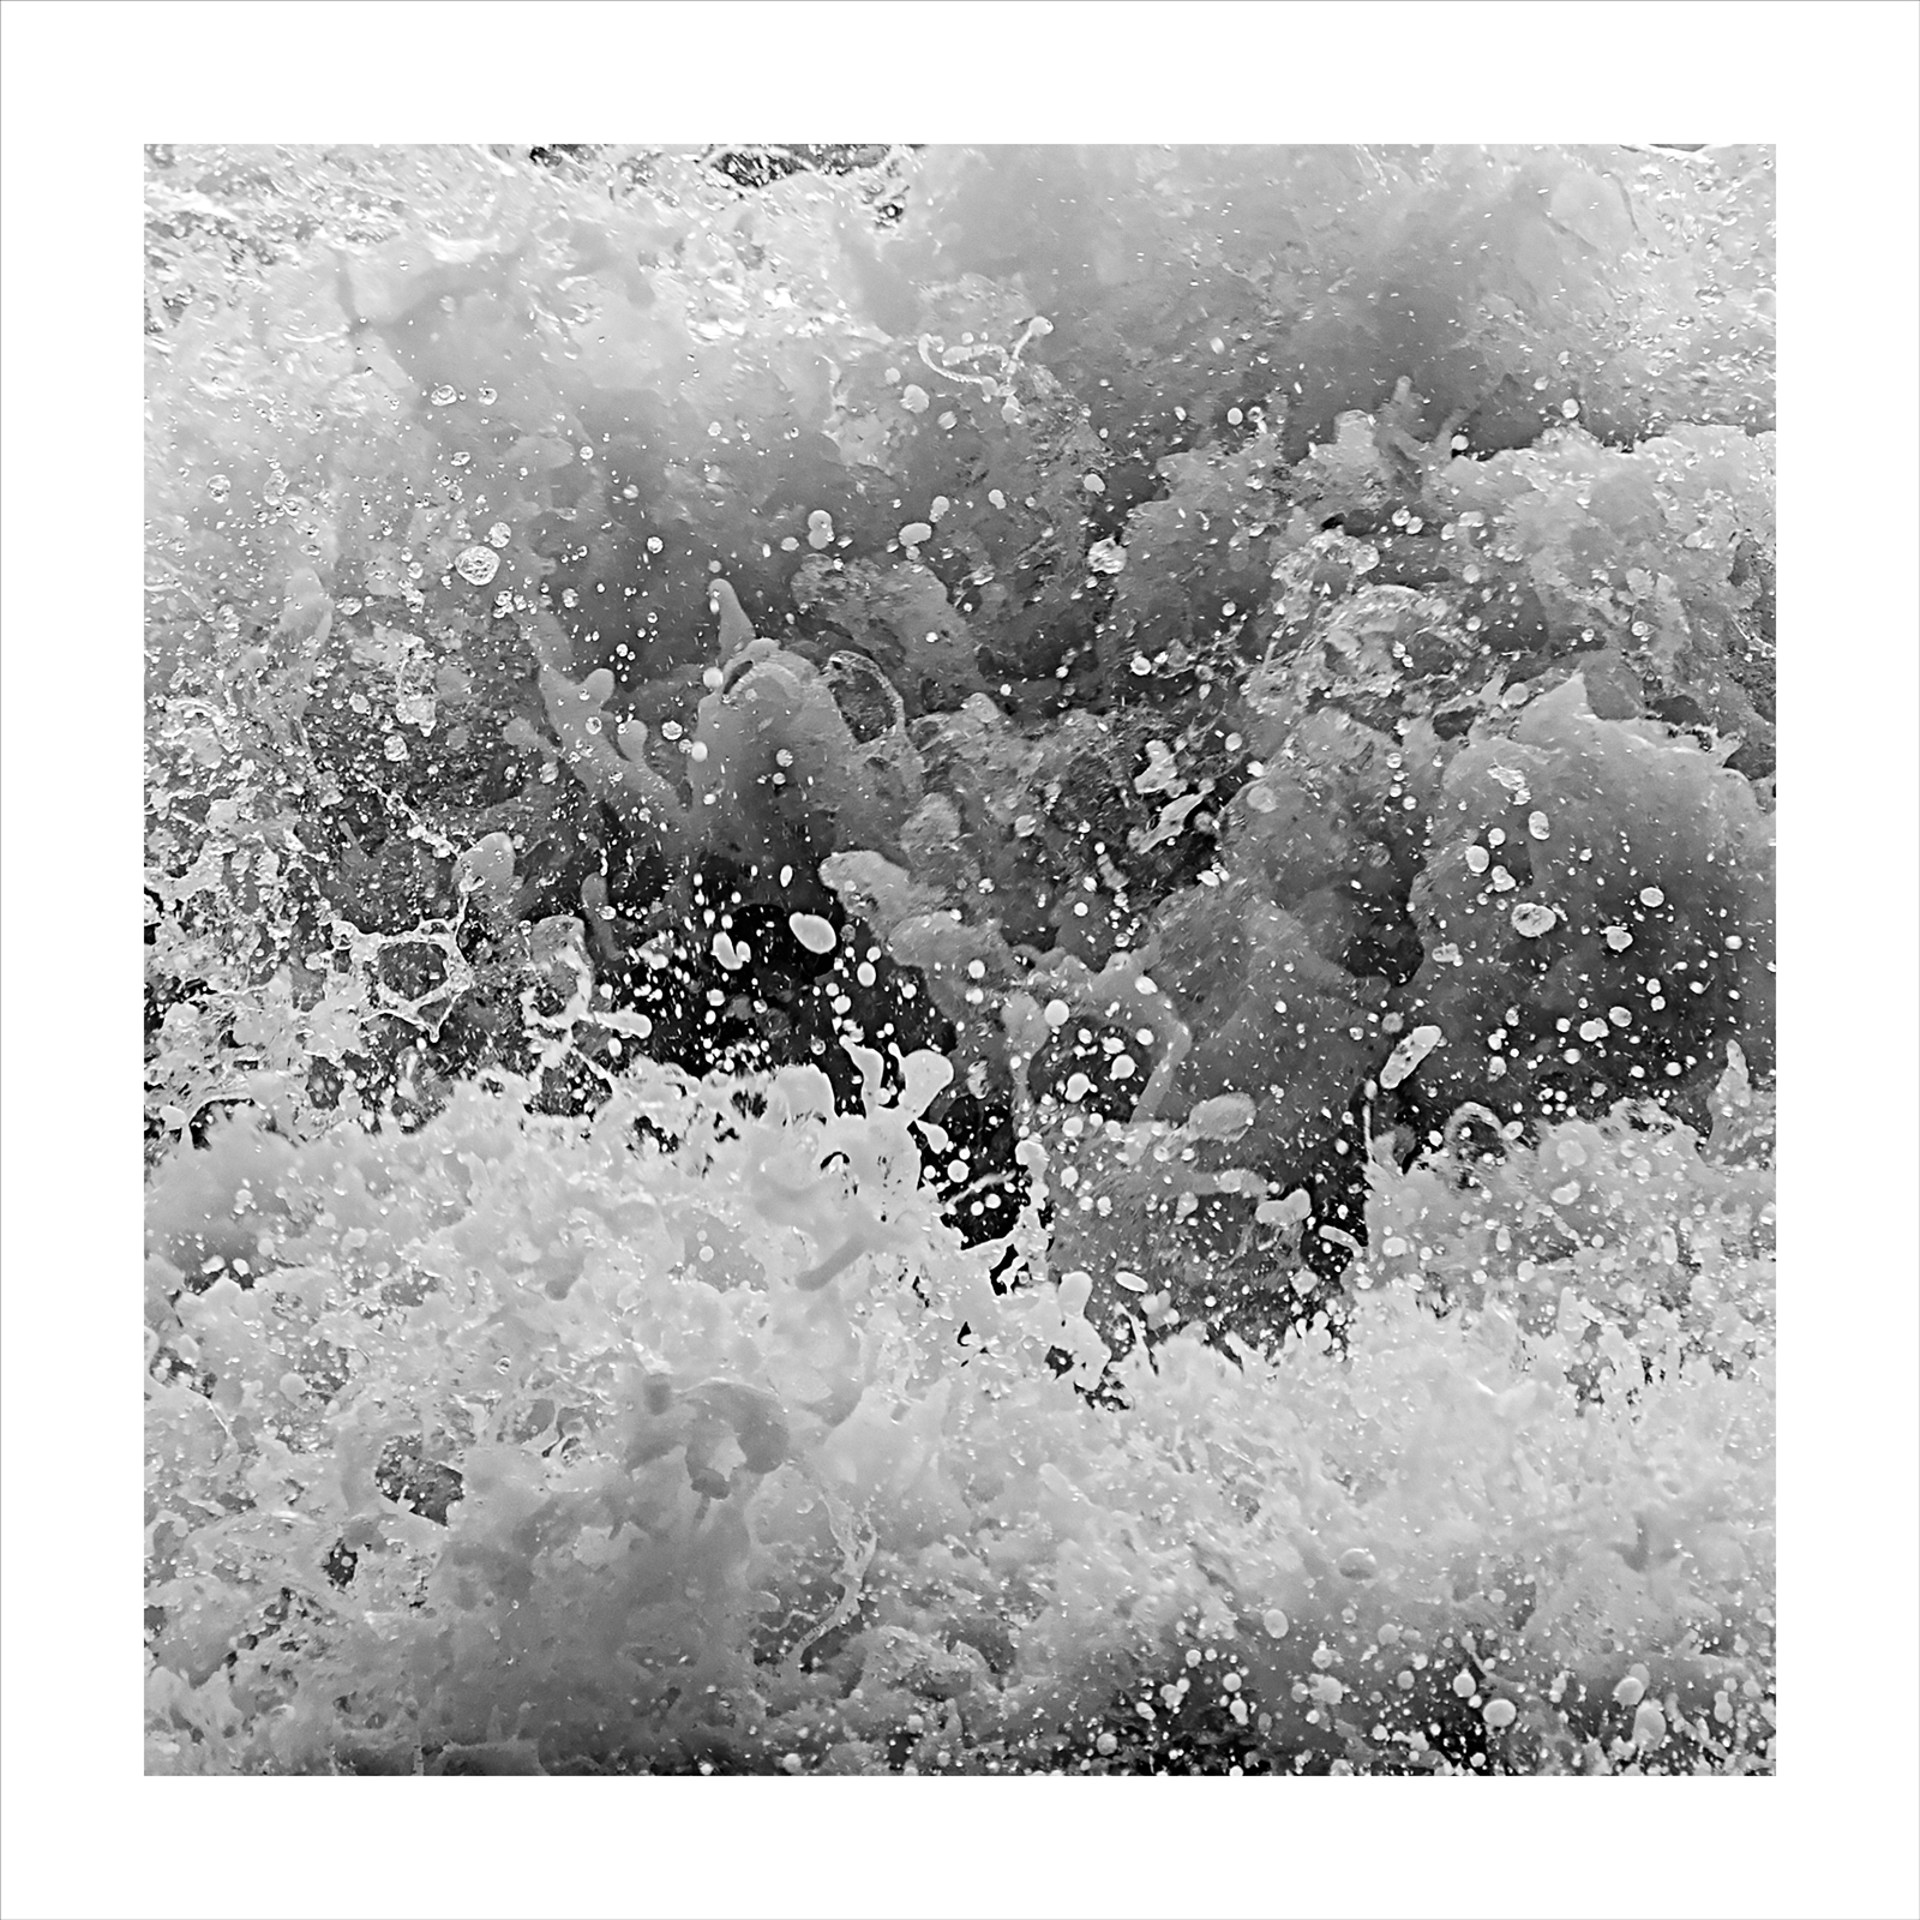 Force Of Nature- 5S5A8436  (Three inch border-white frame) by Bob Tabor